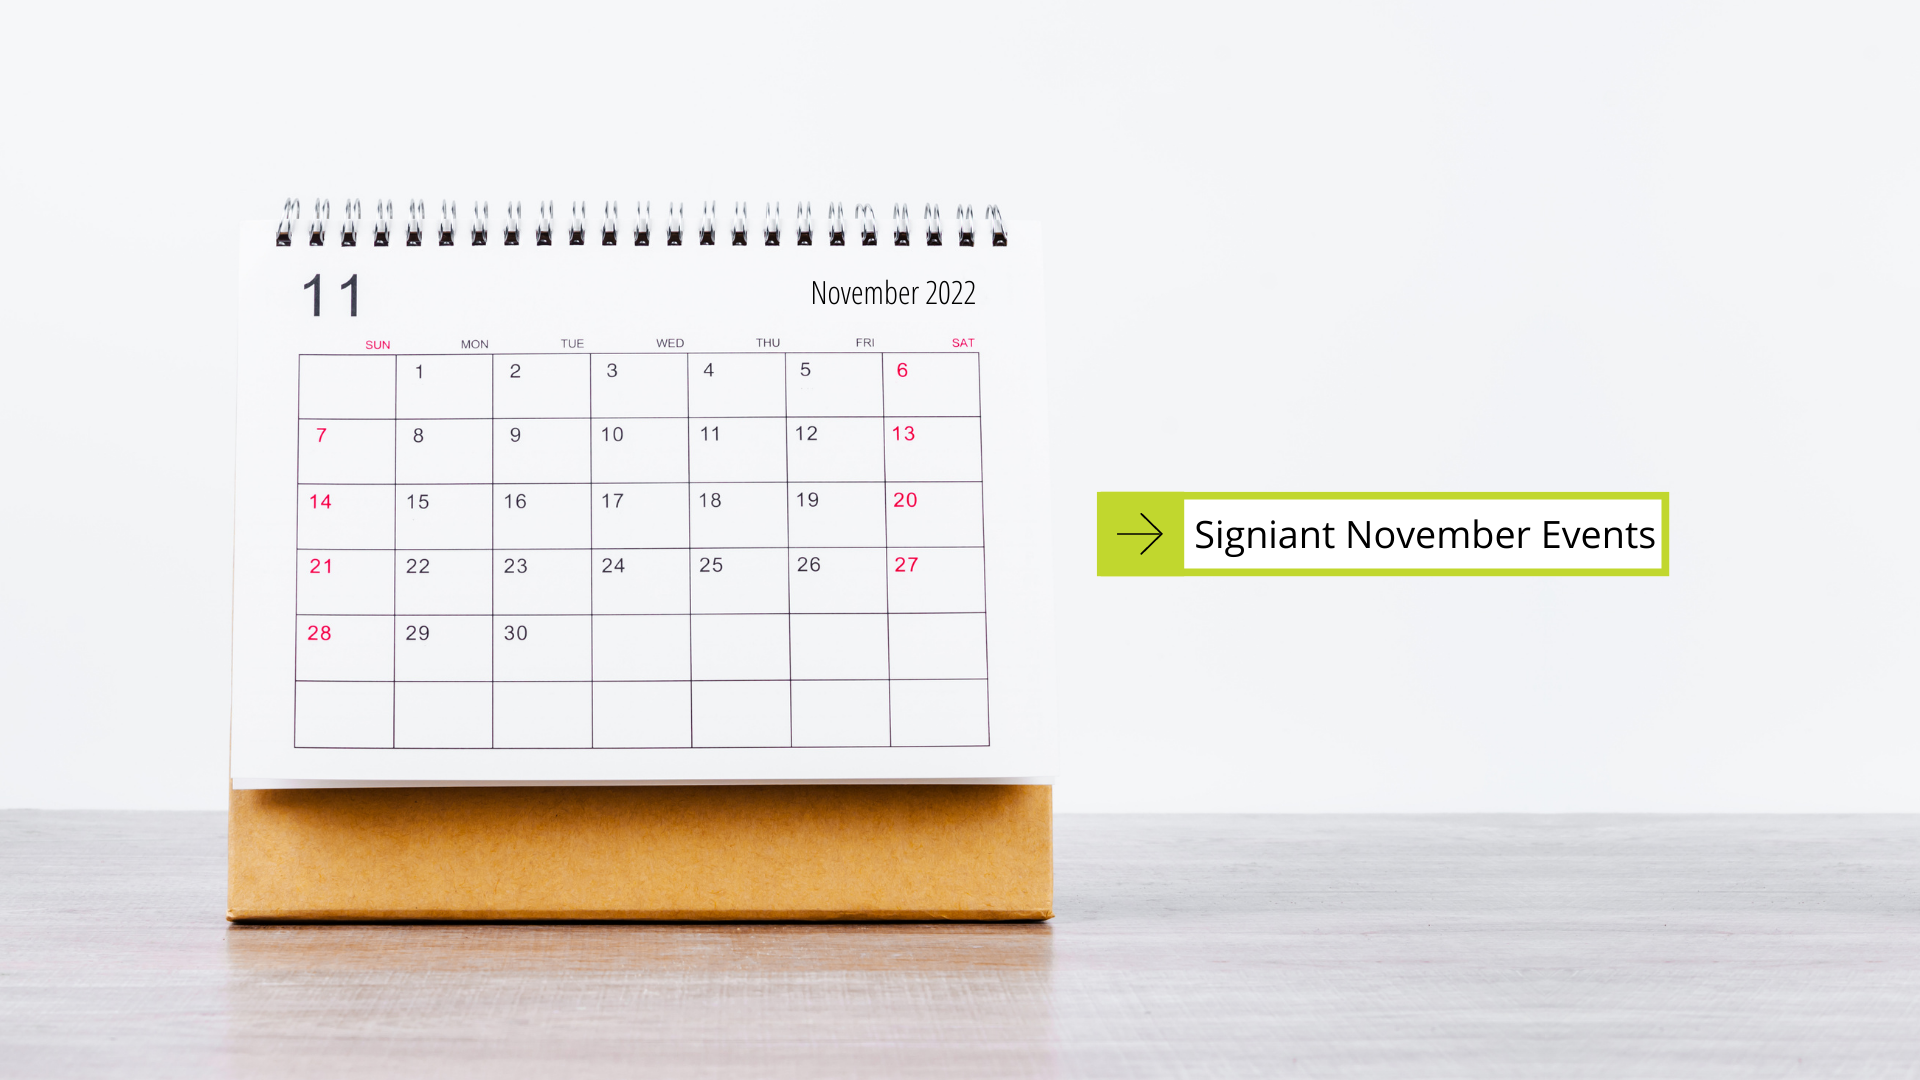 Signiant November Events calendar propped up on table with white background